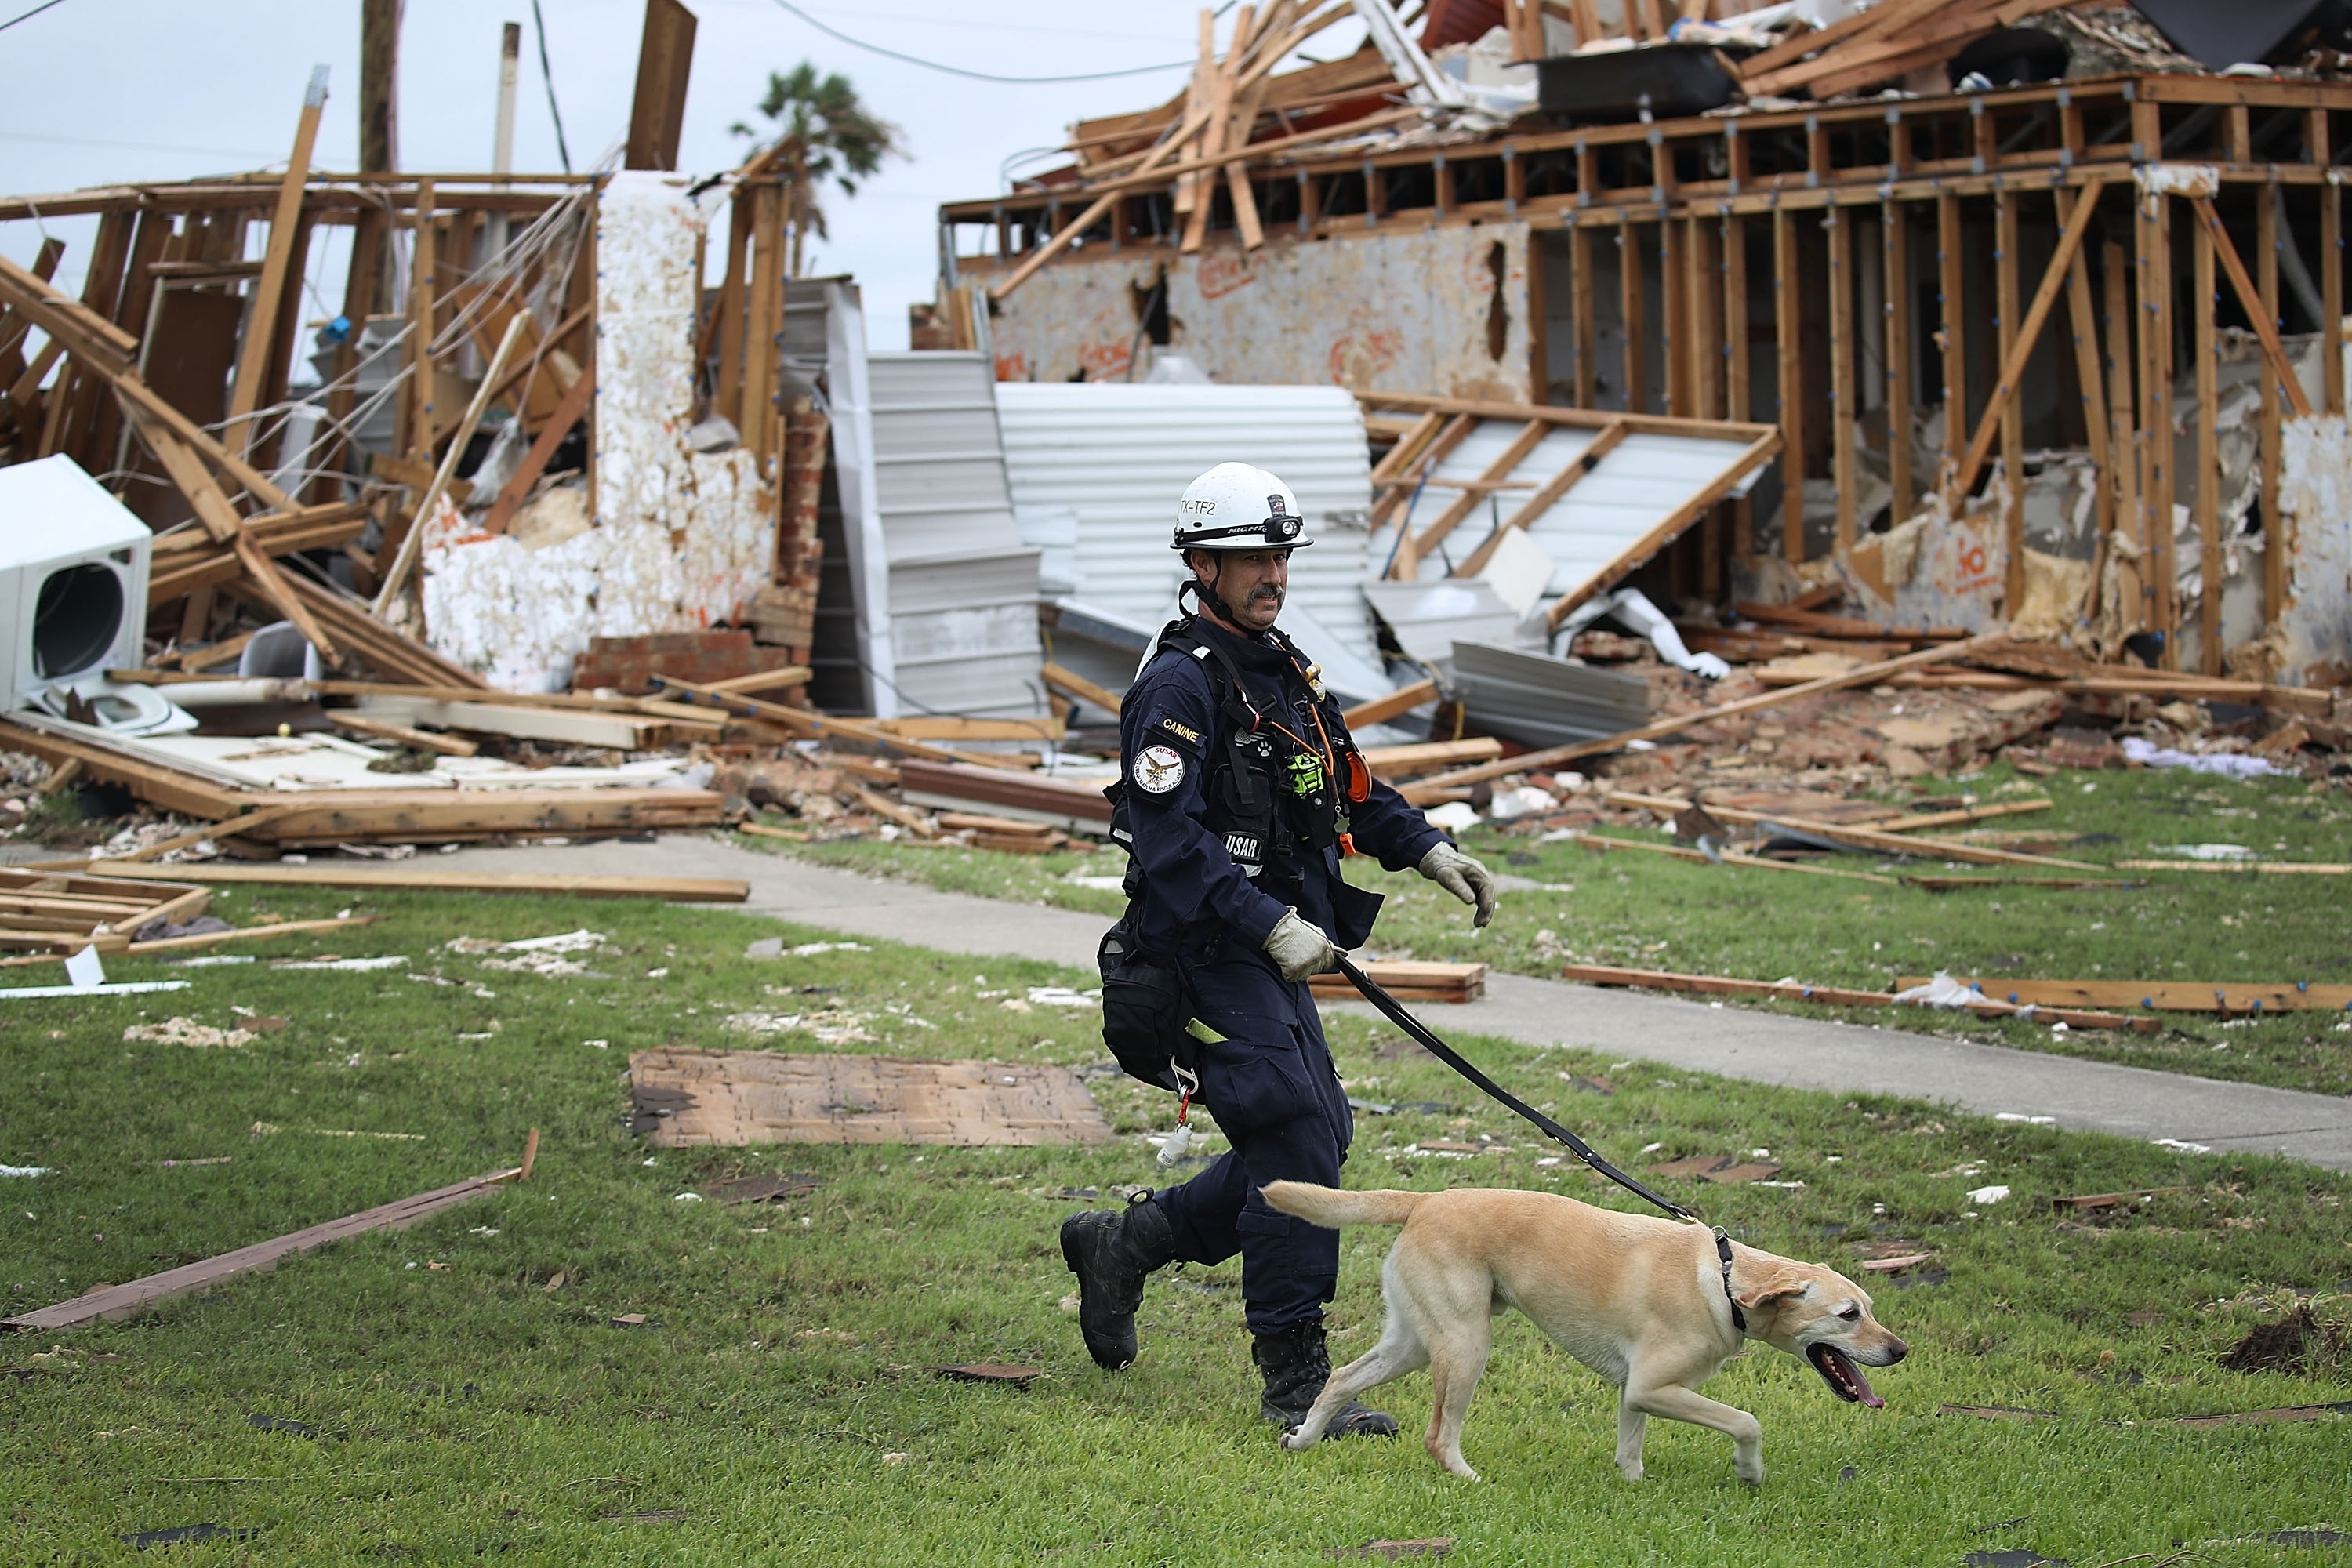 Robert Grant and Rocky from the Texas Task Force 2 search and rescue team work through a destroyed apartment complex trying to find anyone that still may be in the apartment complex after Hurricane Harvey passed through on August 27, 2017 in Rockport, Texas.